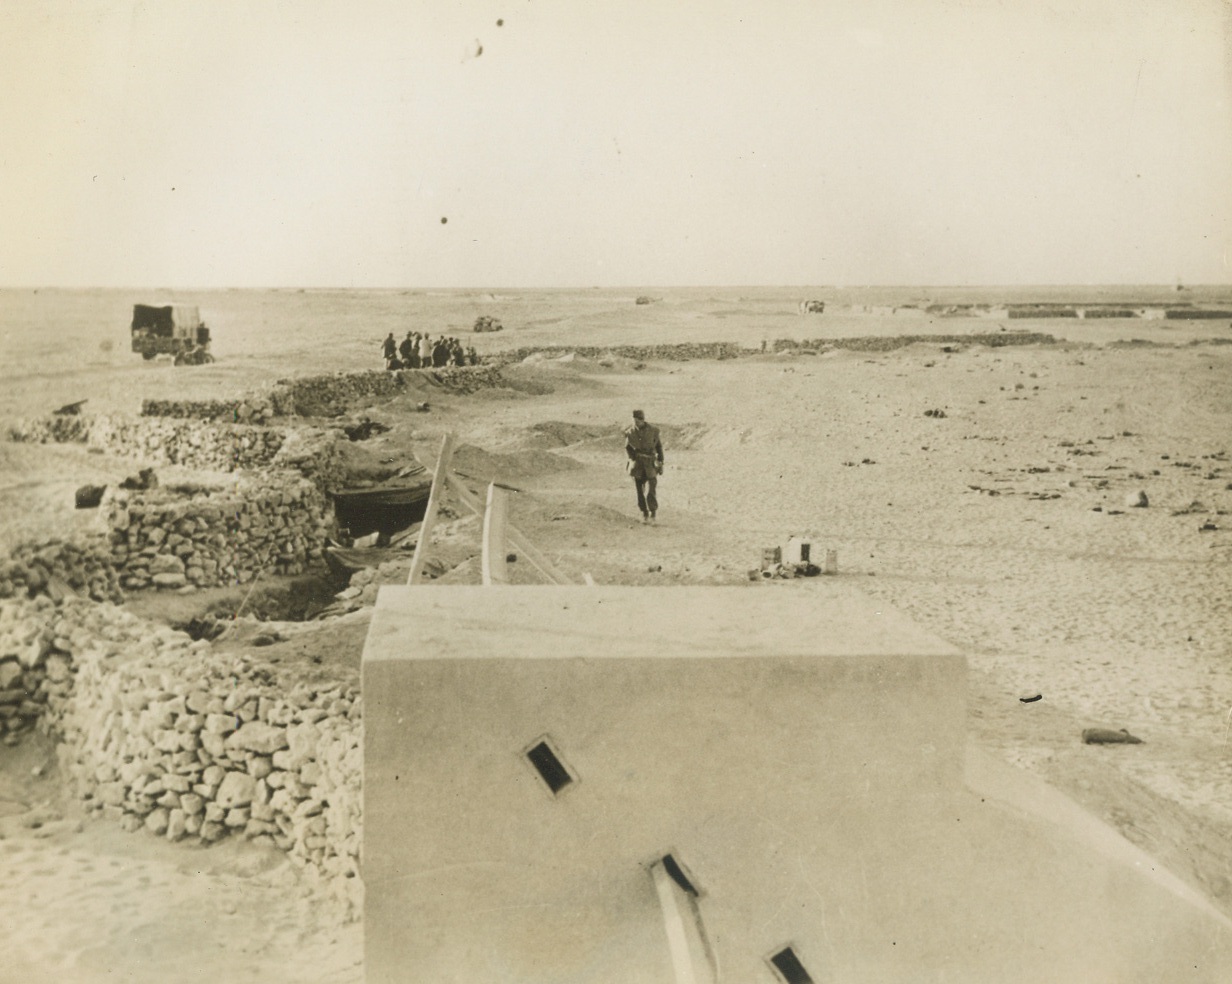 ... Defense Captured By British Troops, 2/5/41  …Libya - - This general view gives some idea of the Italian defenses here, which the British troops broke through in their recent swift attack on the fortified Italian Libyan seaport.  The British claim that 34,000 troops four generals and vast amounts of war materials were captured in the fall of the city. Credit line (ACME);